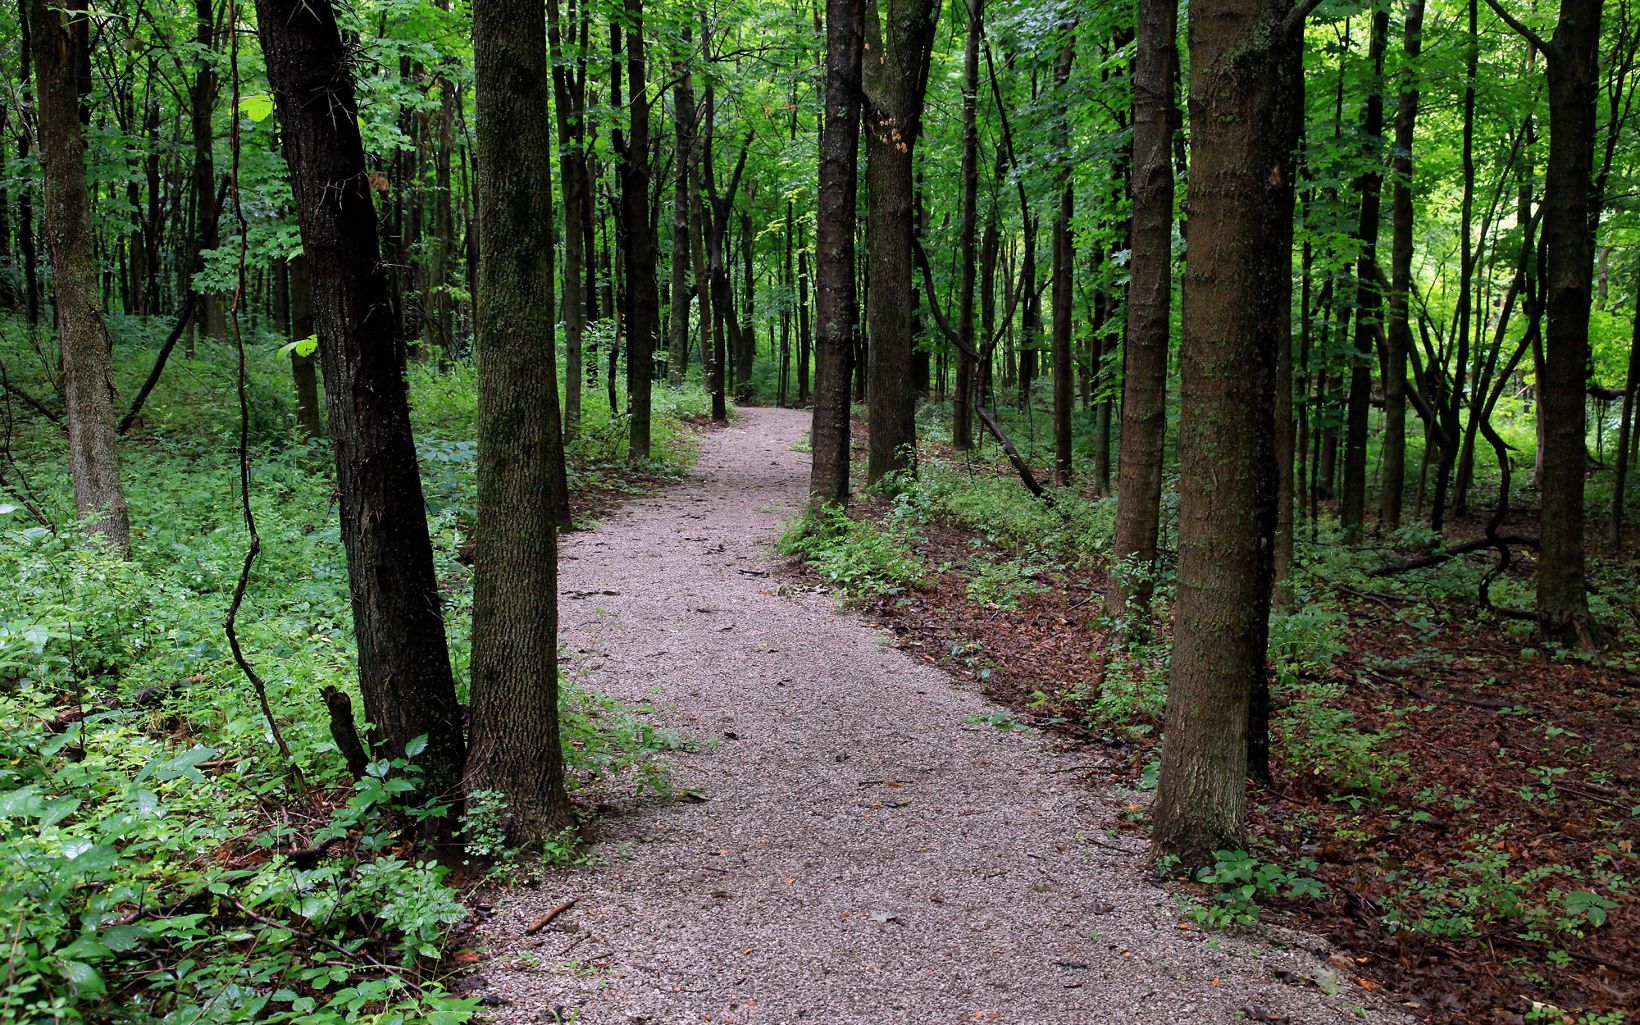 A clear, tree-lined dirt trail winds through a forest of tall trees.